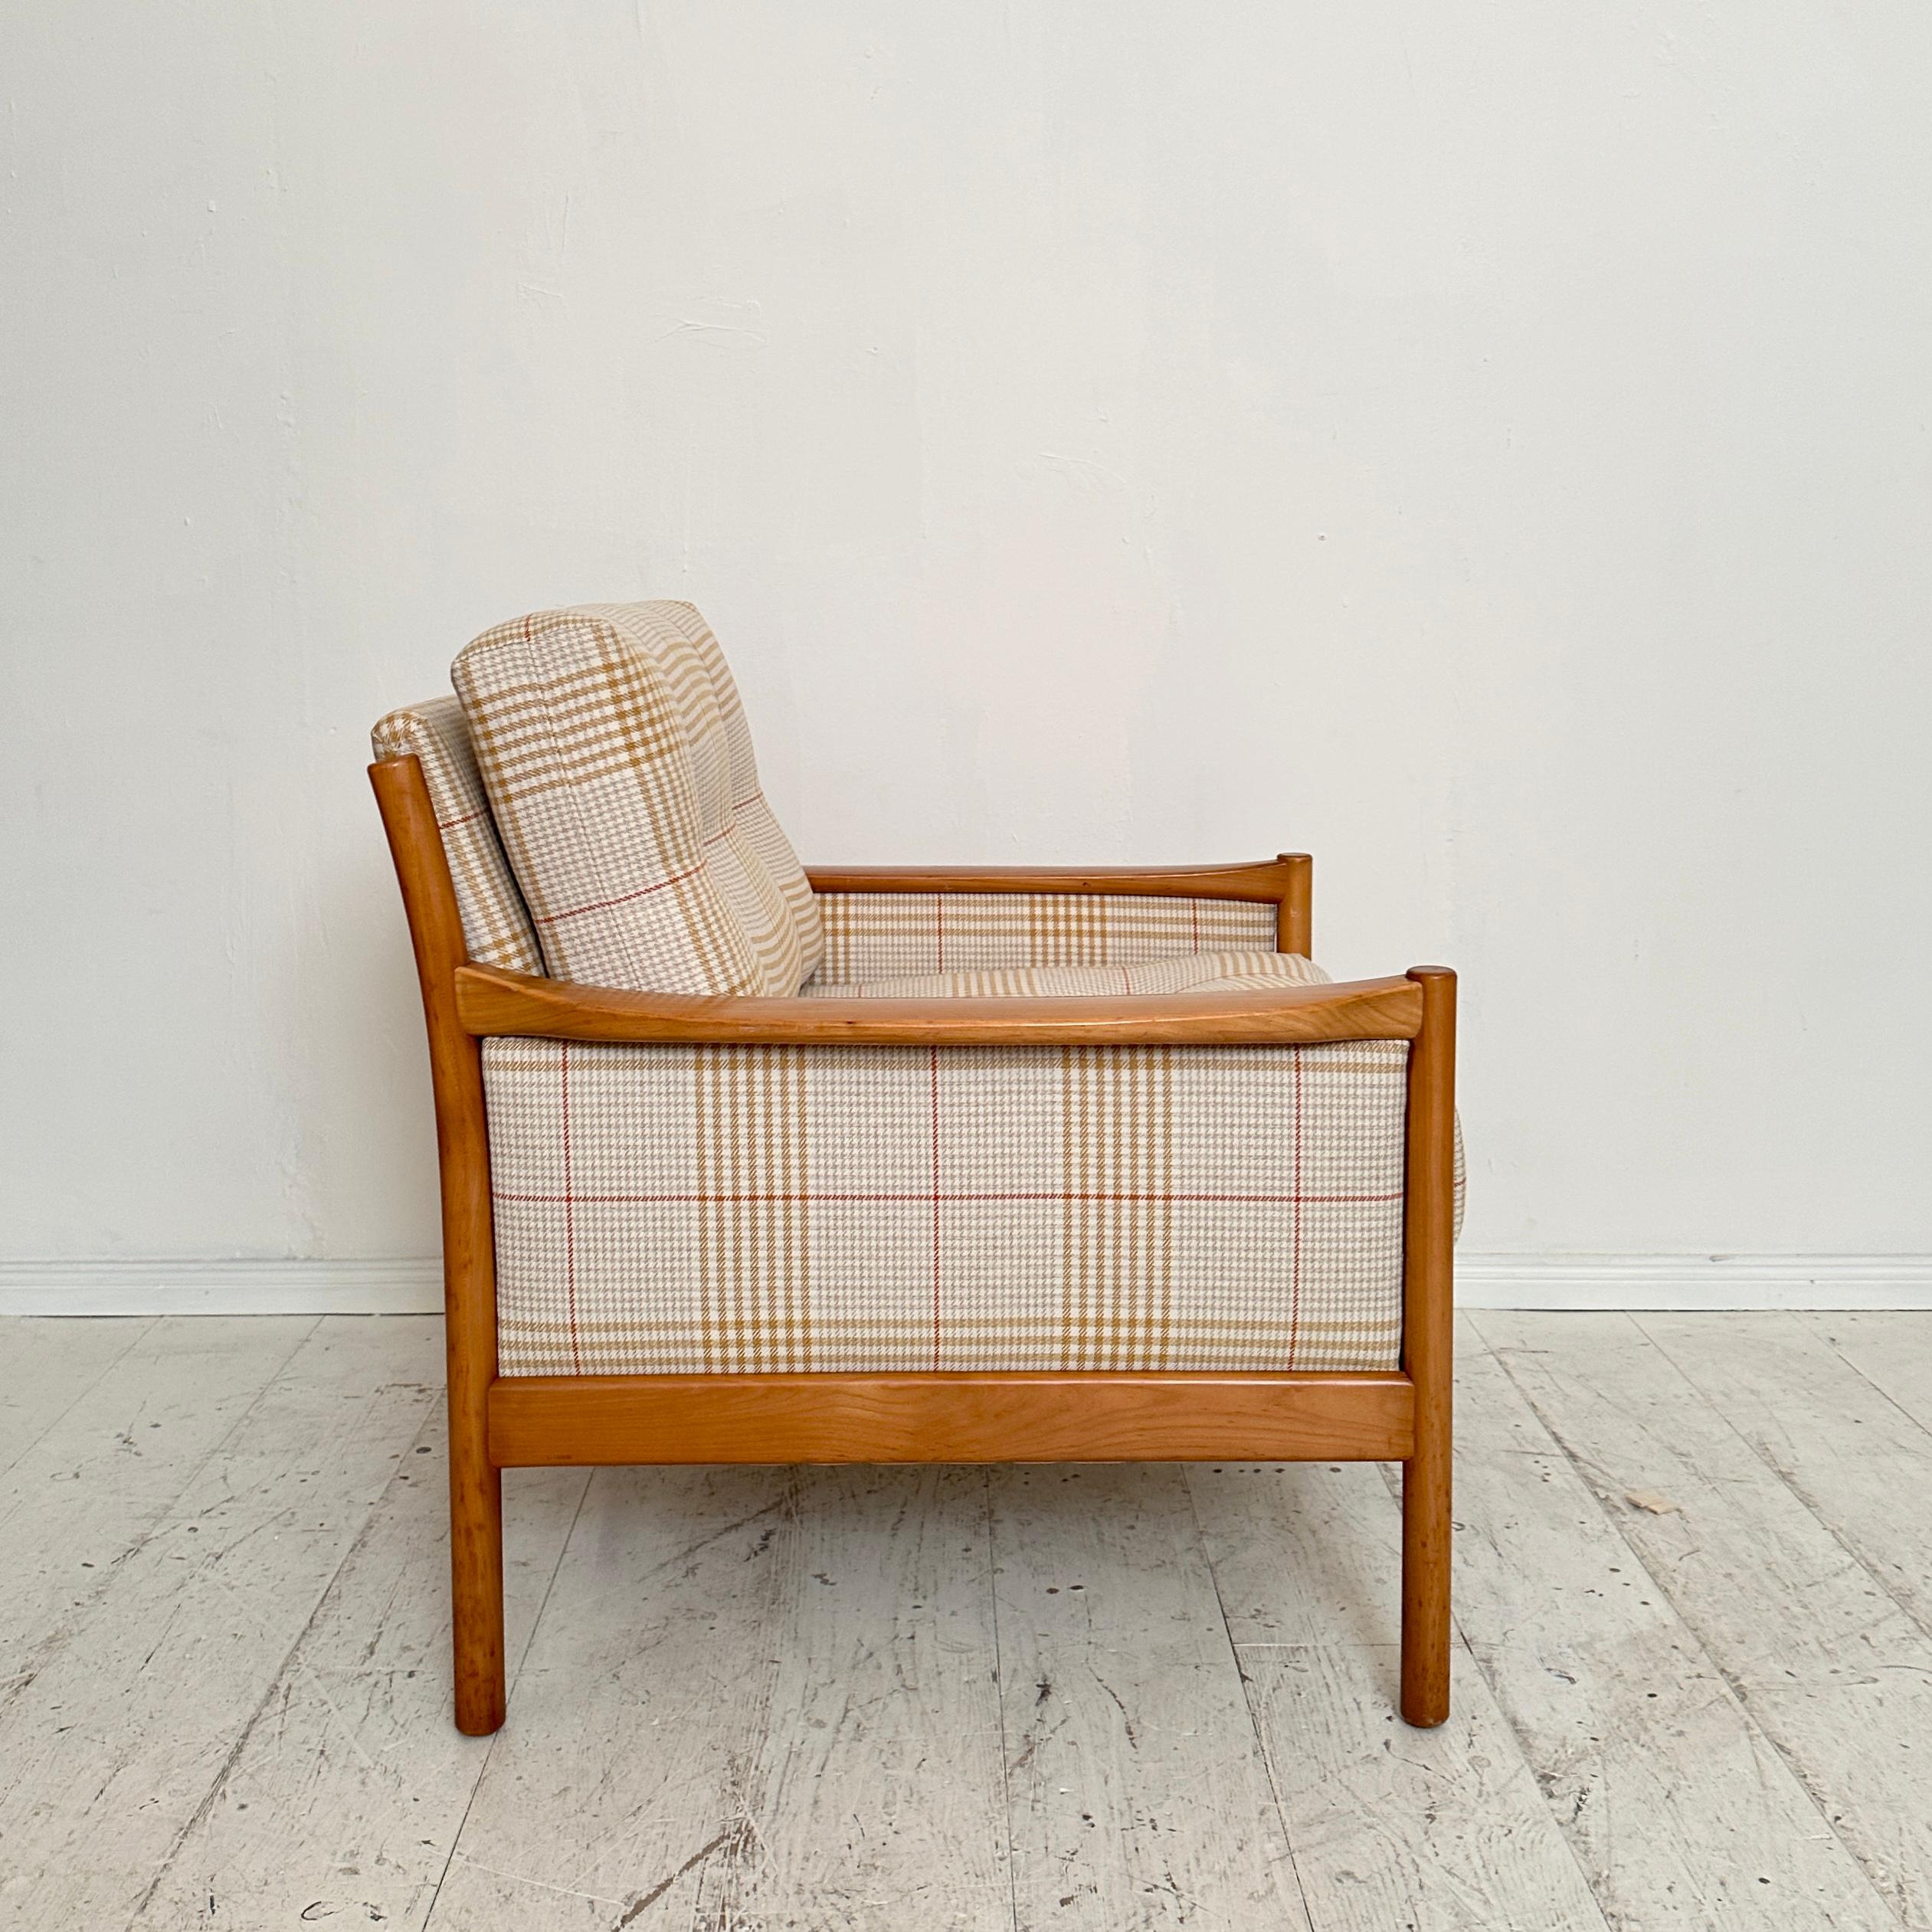 Mid Century Scandinavian Armchair in Cherry Wood and Checked Fabric, ca. 1960 For Sale 6